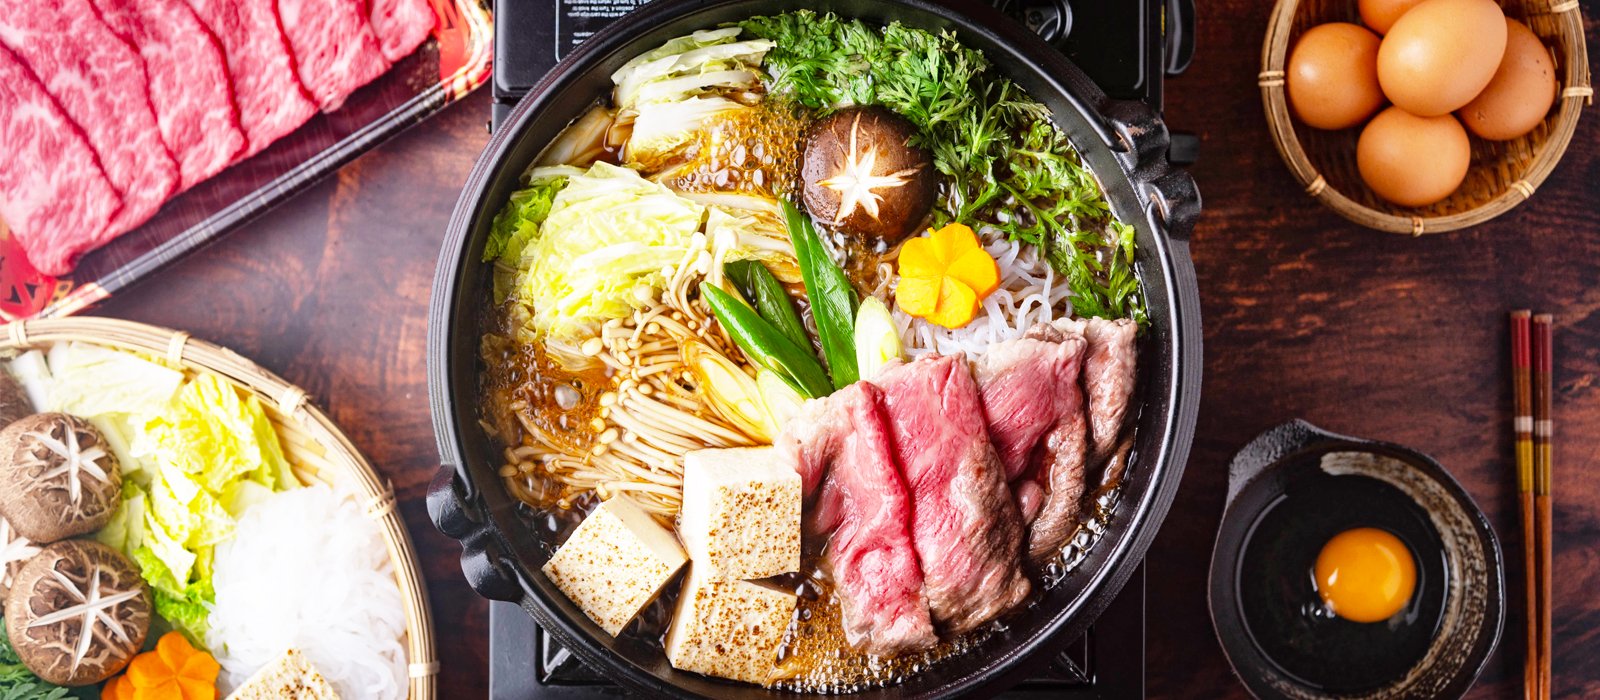 You Should Not Miss This If You Are A Fan Of Japanese Cuisines, Try These Traditional Japanese Cuisines You Probably Don't Know About